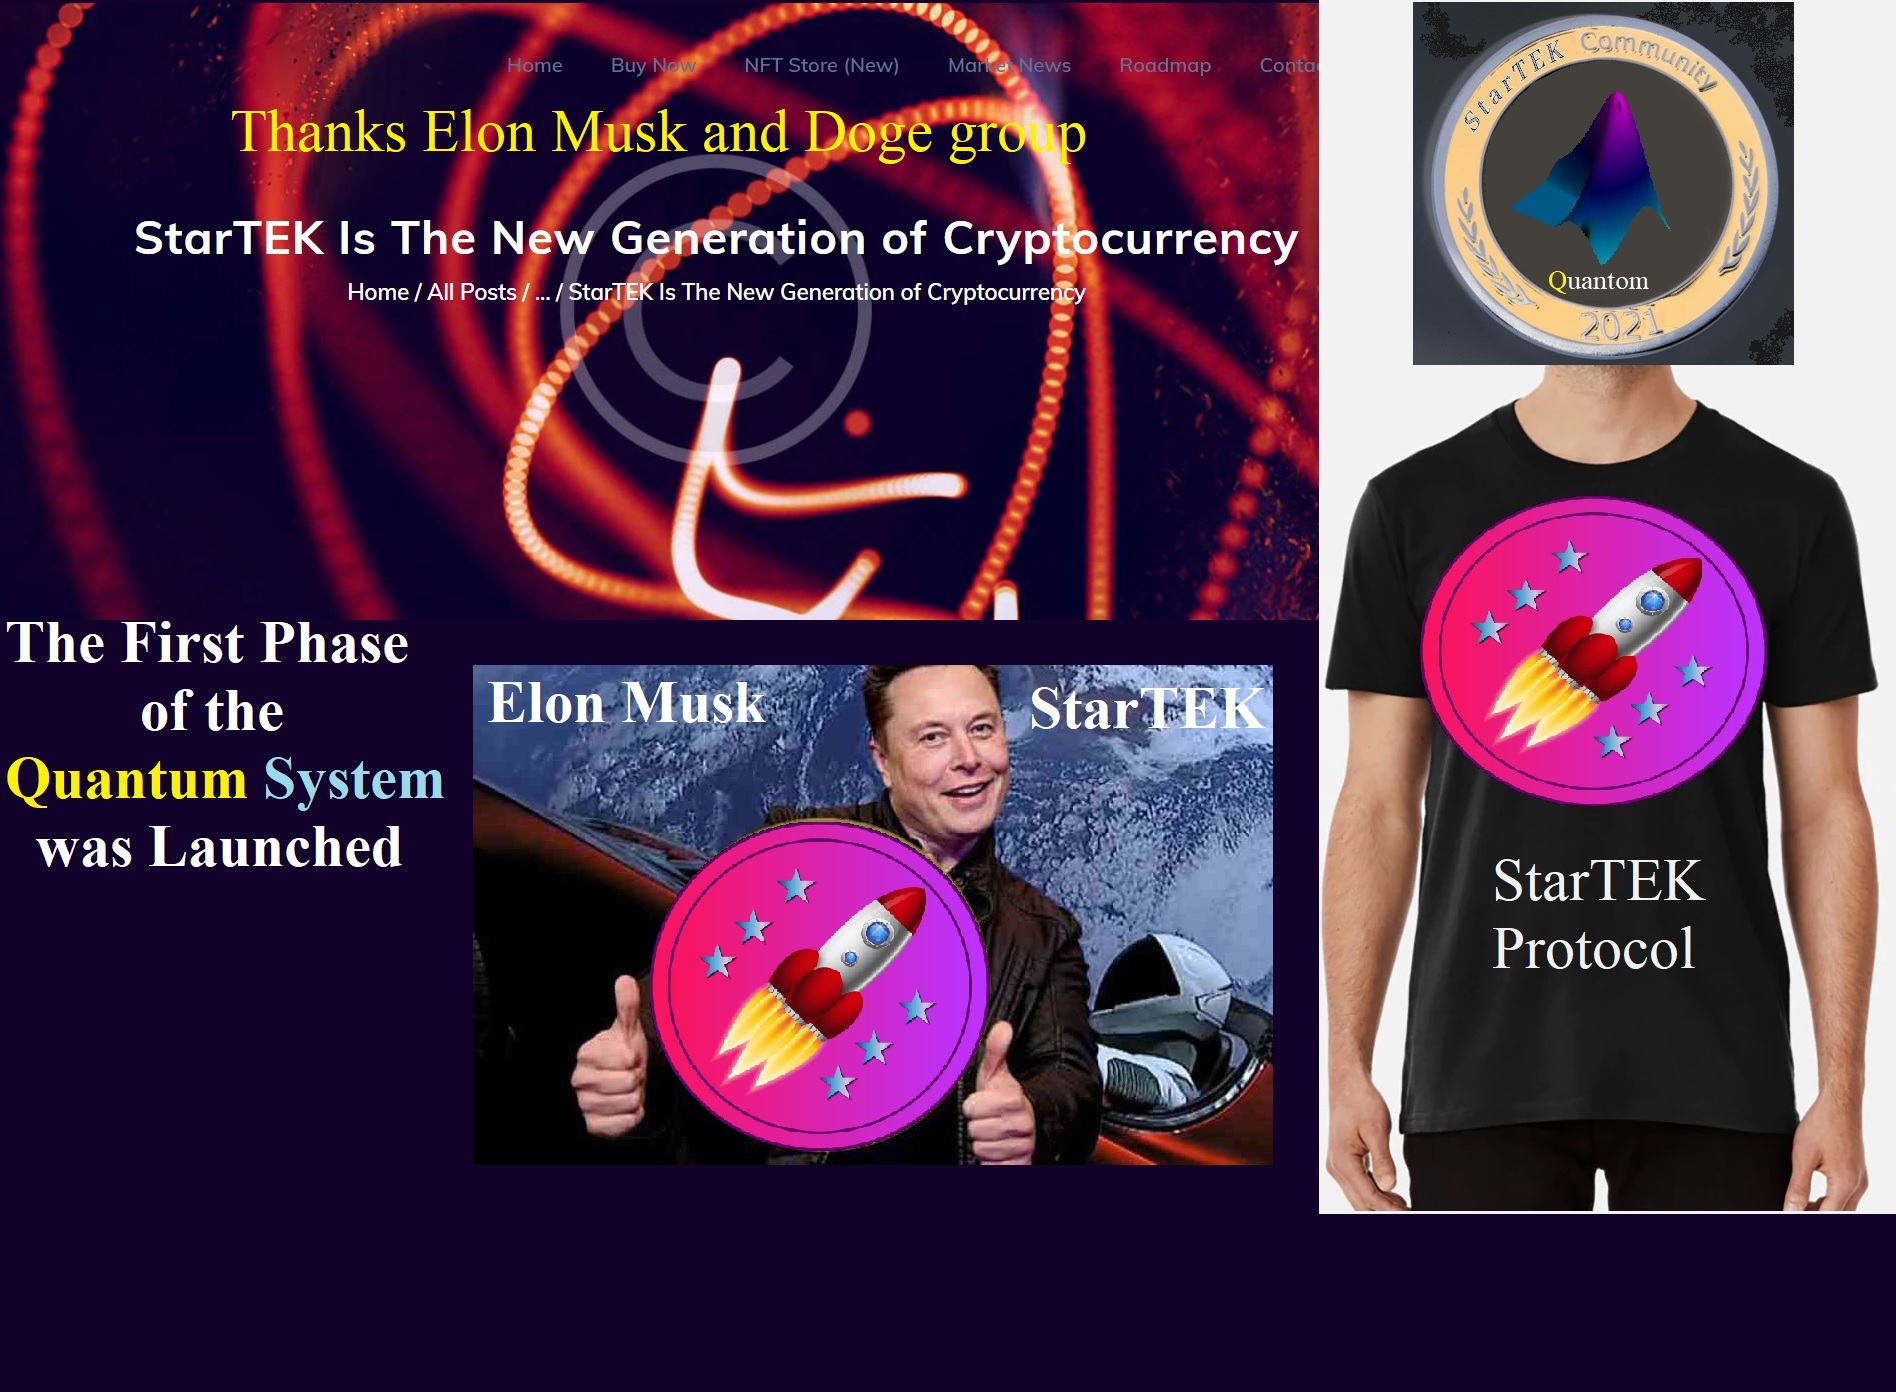 startek-will-cooperate-with-elon-musk-for-next-generation-of-cryptocurrency-quantum-system